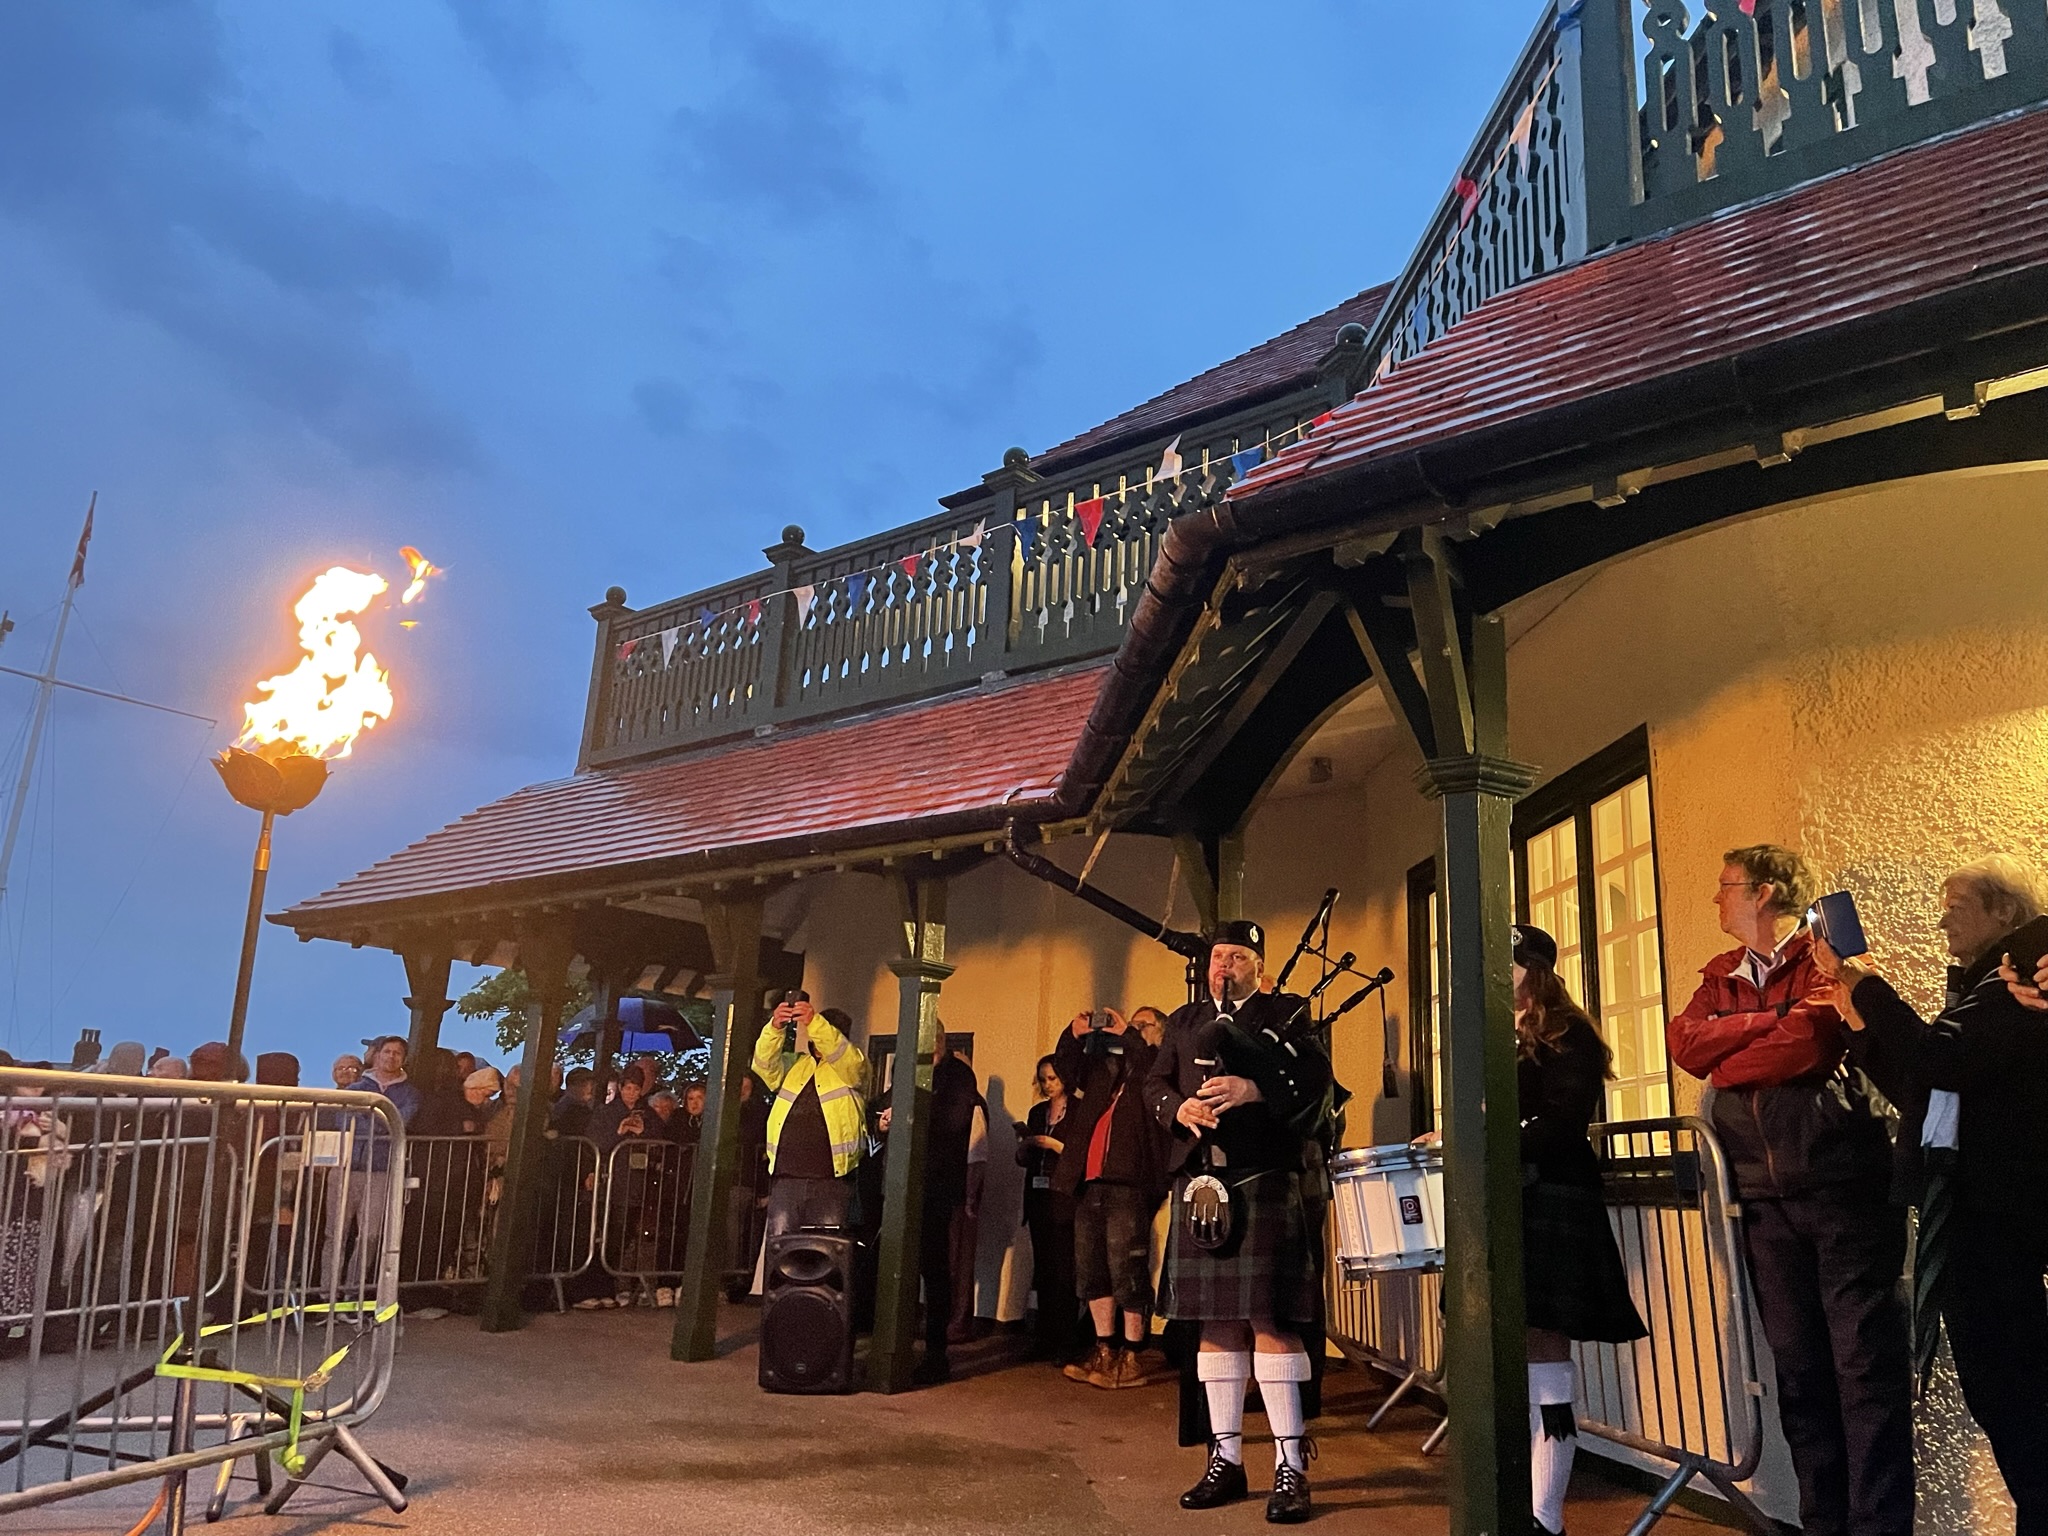 Beacon lighting the mount jubilee piper and beacon flame